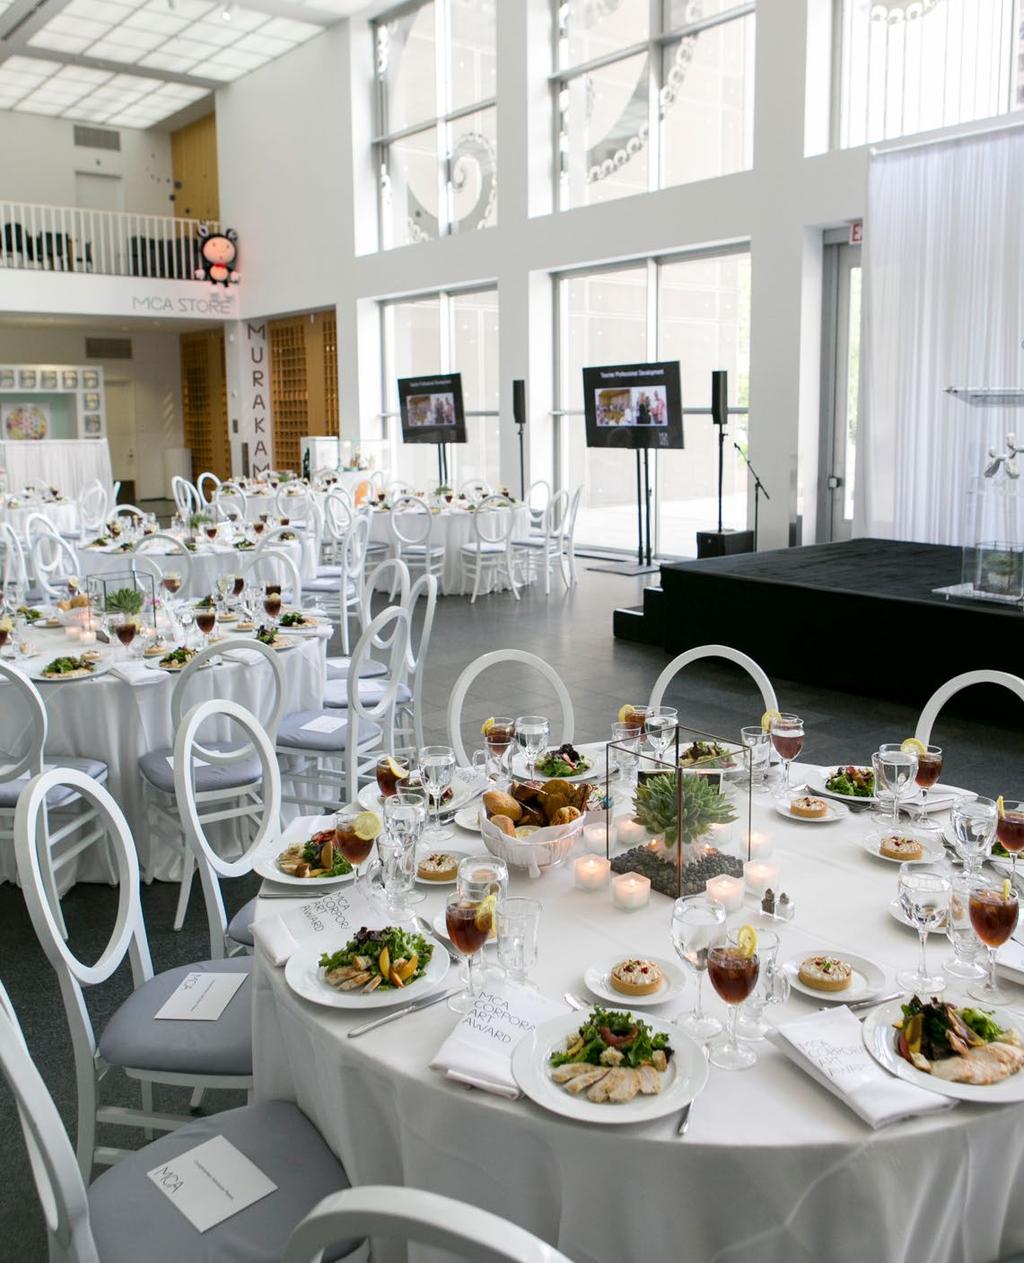 Catering must be paid for in full by the week prior to your event. Do you have any preferred hotel partners? Yes.